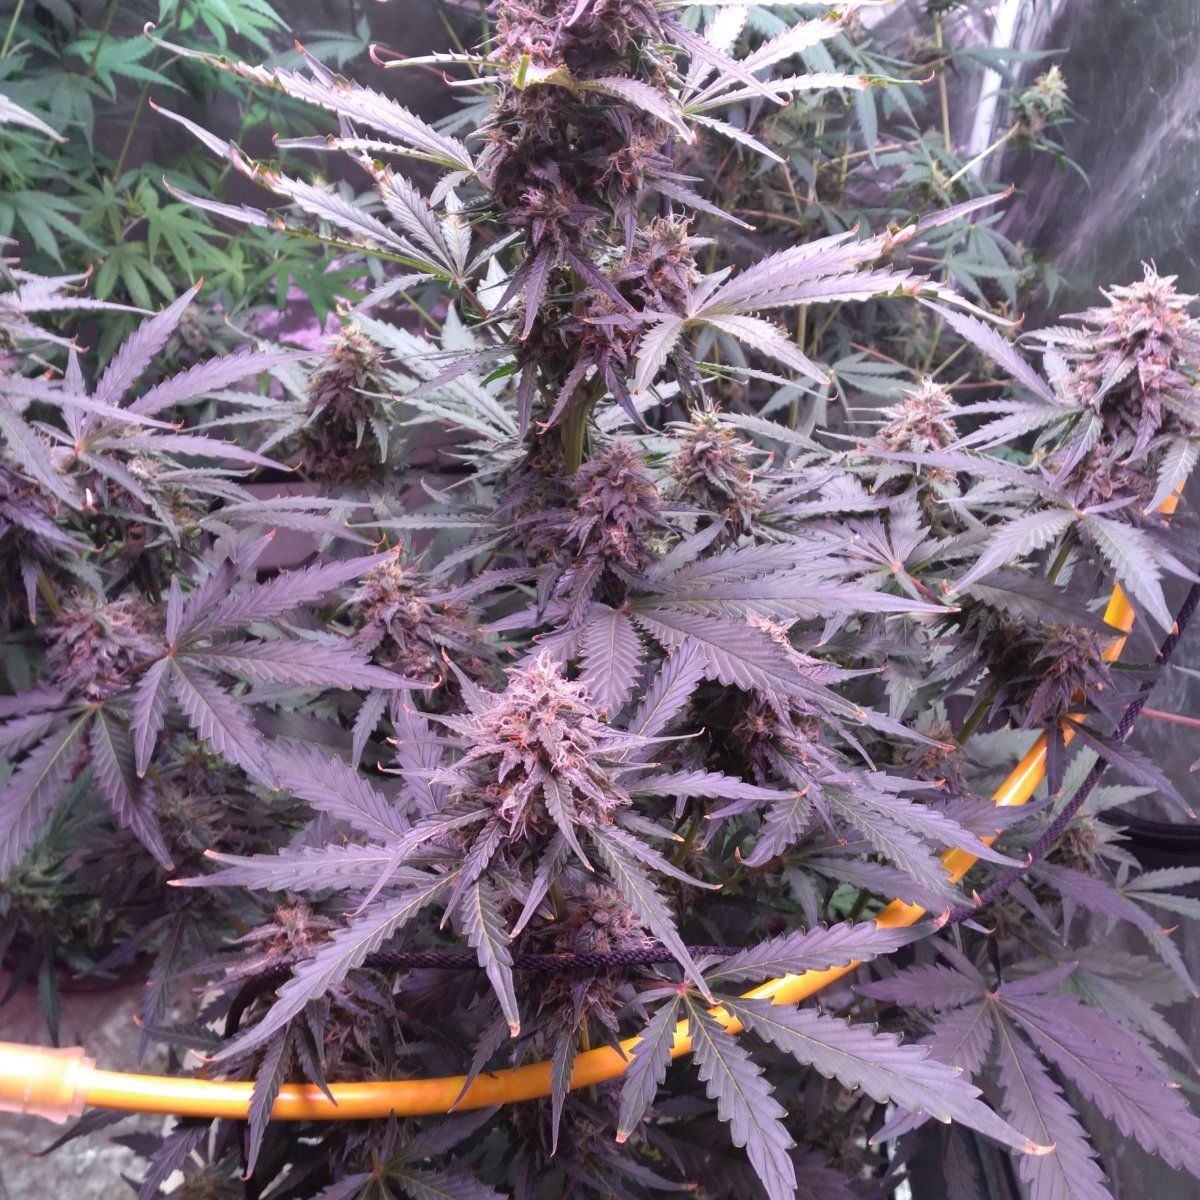 Never had any problems with growing till now 2